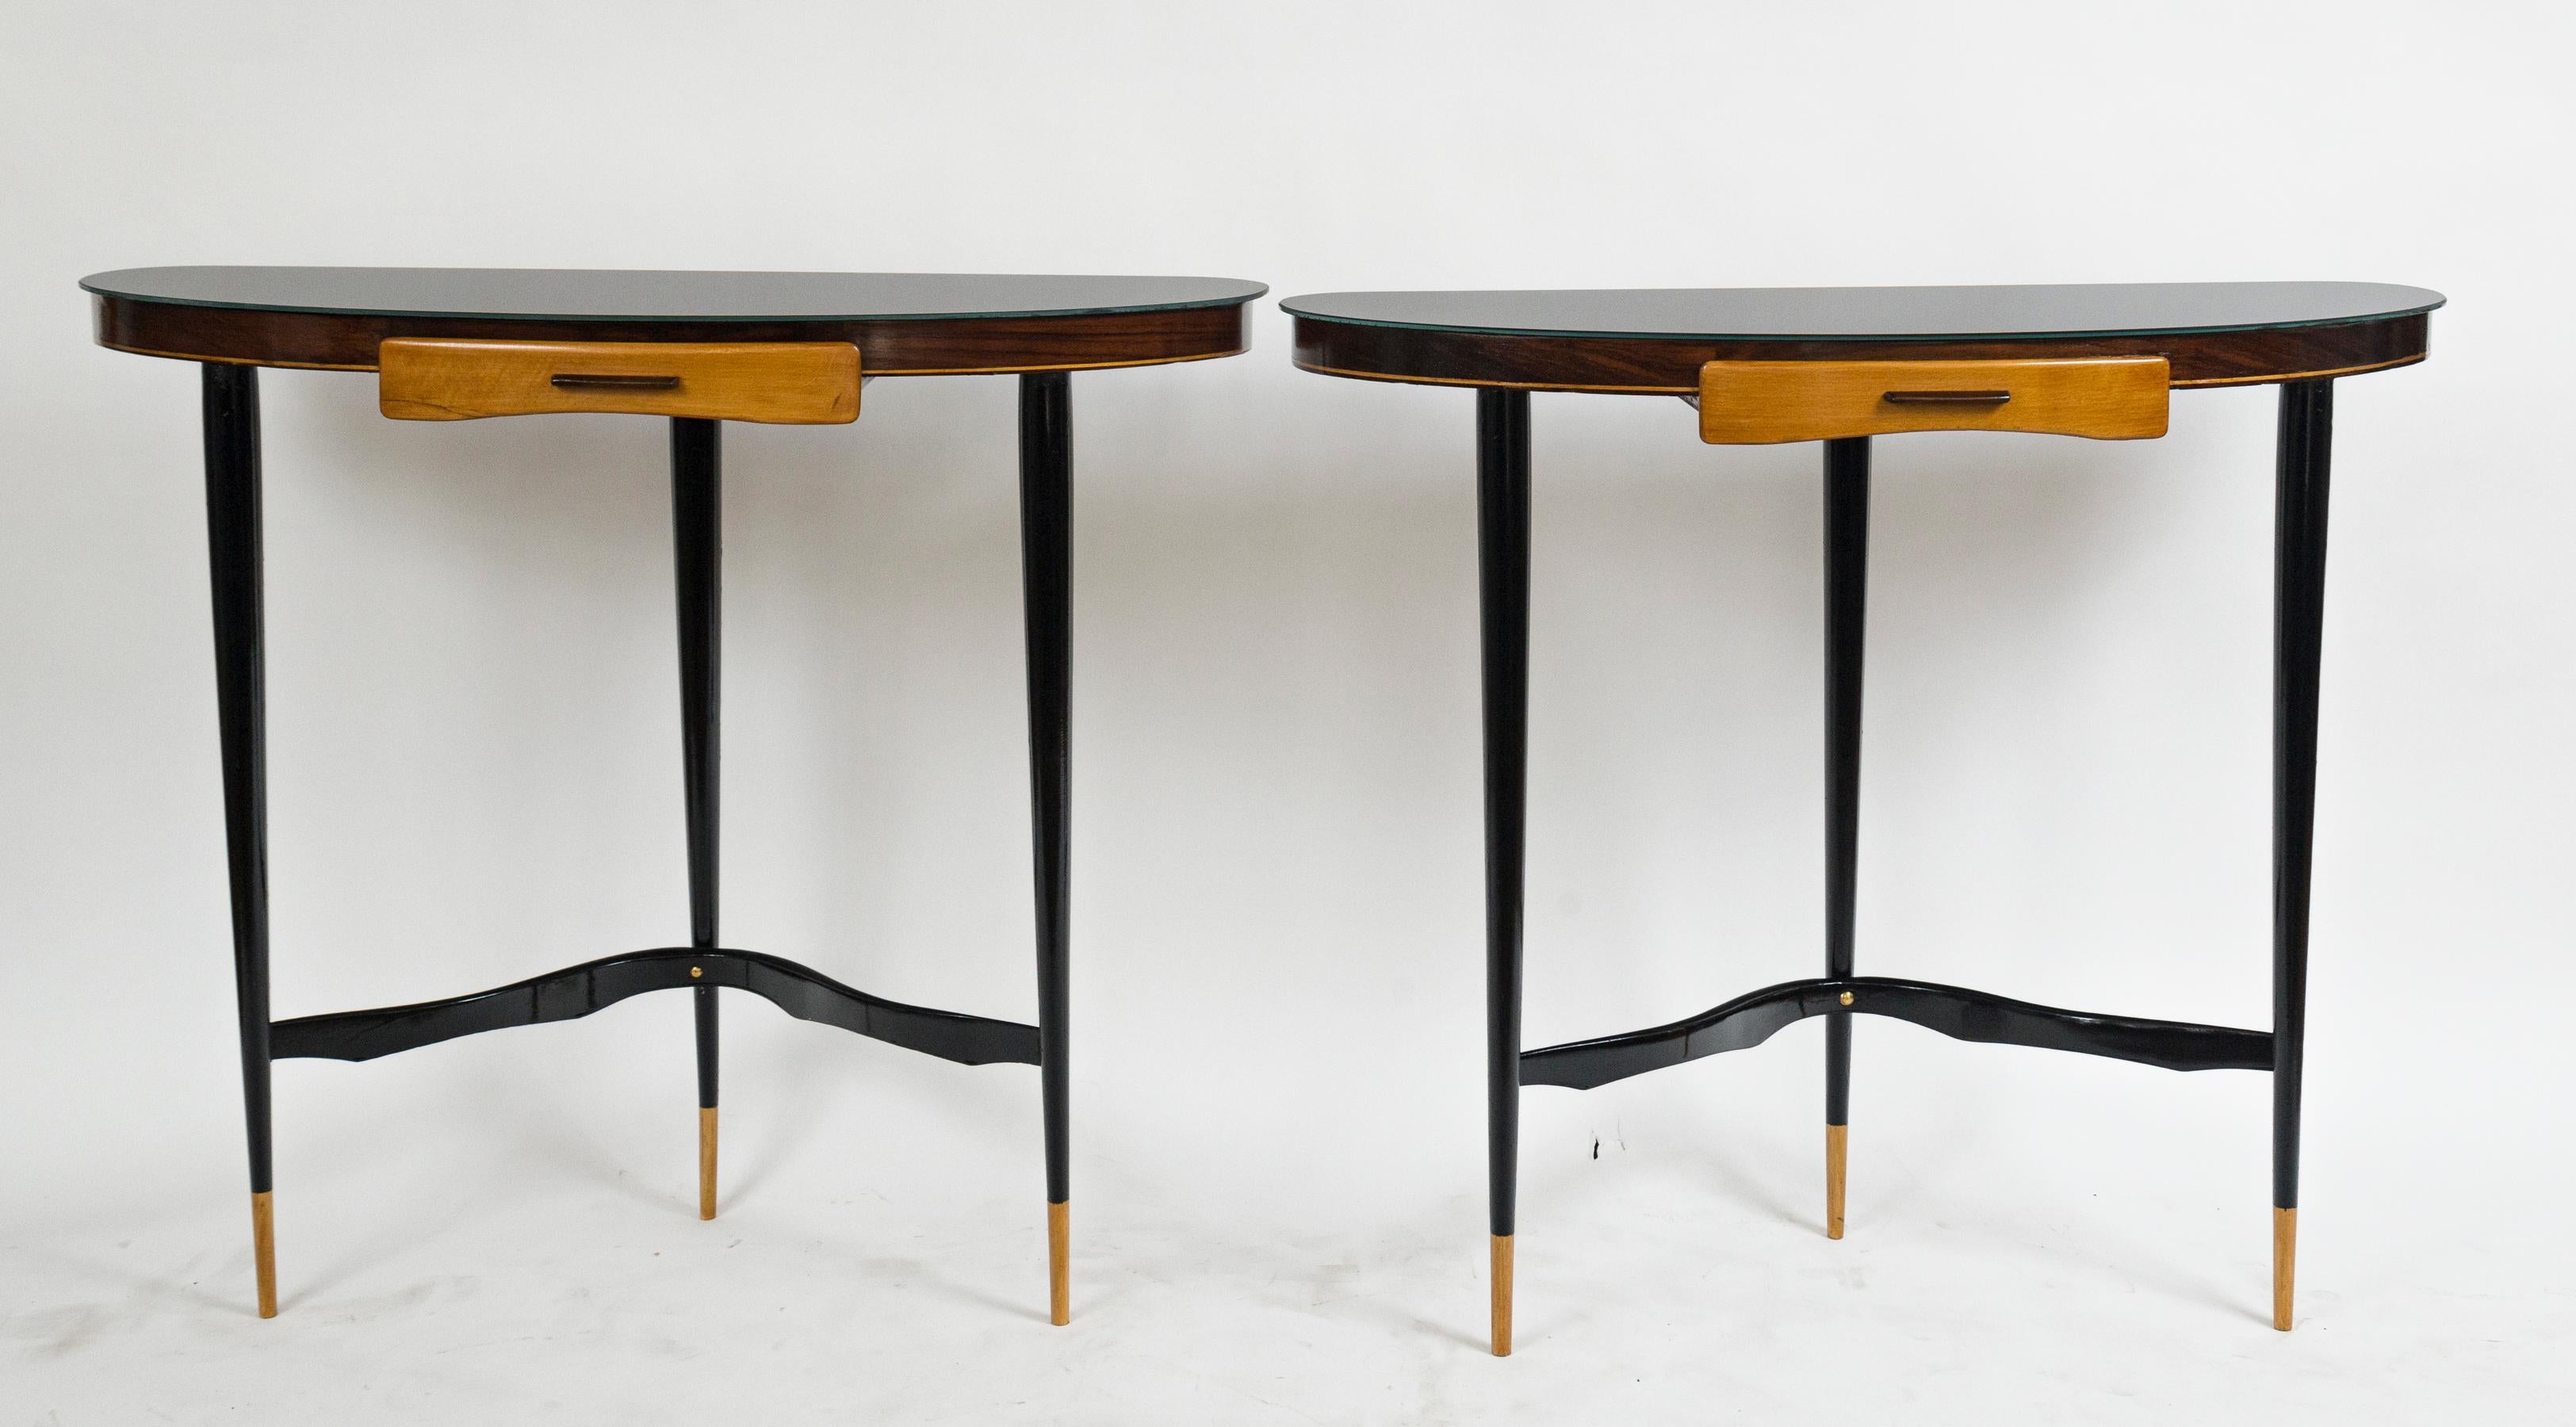 Unique pair of rounded d-shaped black glass top consoles with an ash drawer tucked in its sleek apron, finishing on three rounded tapered legs joined by a lacquered curved stretcher, legs painted black on pine and ash
In the manner of Ico